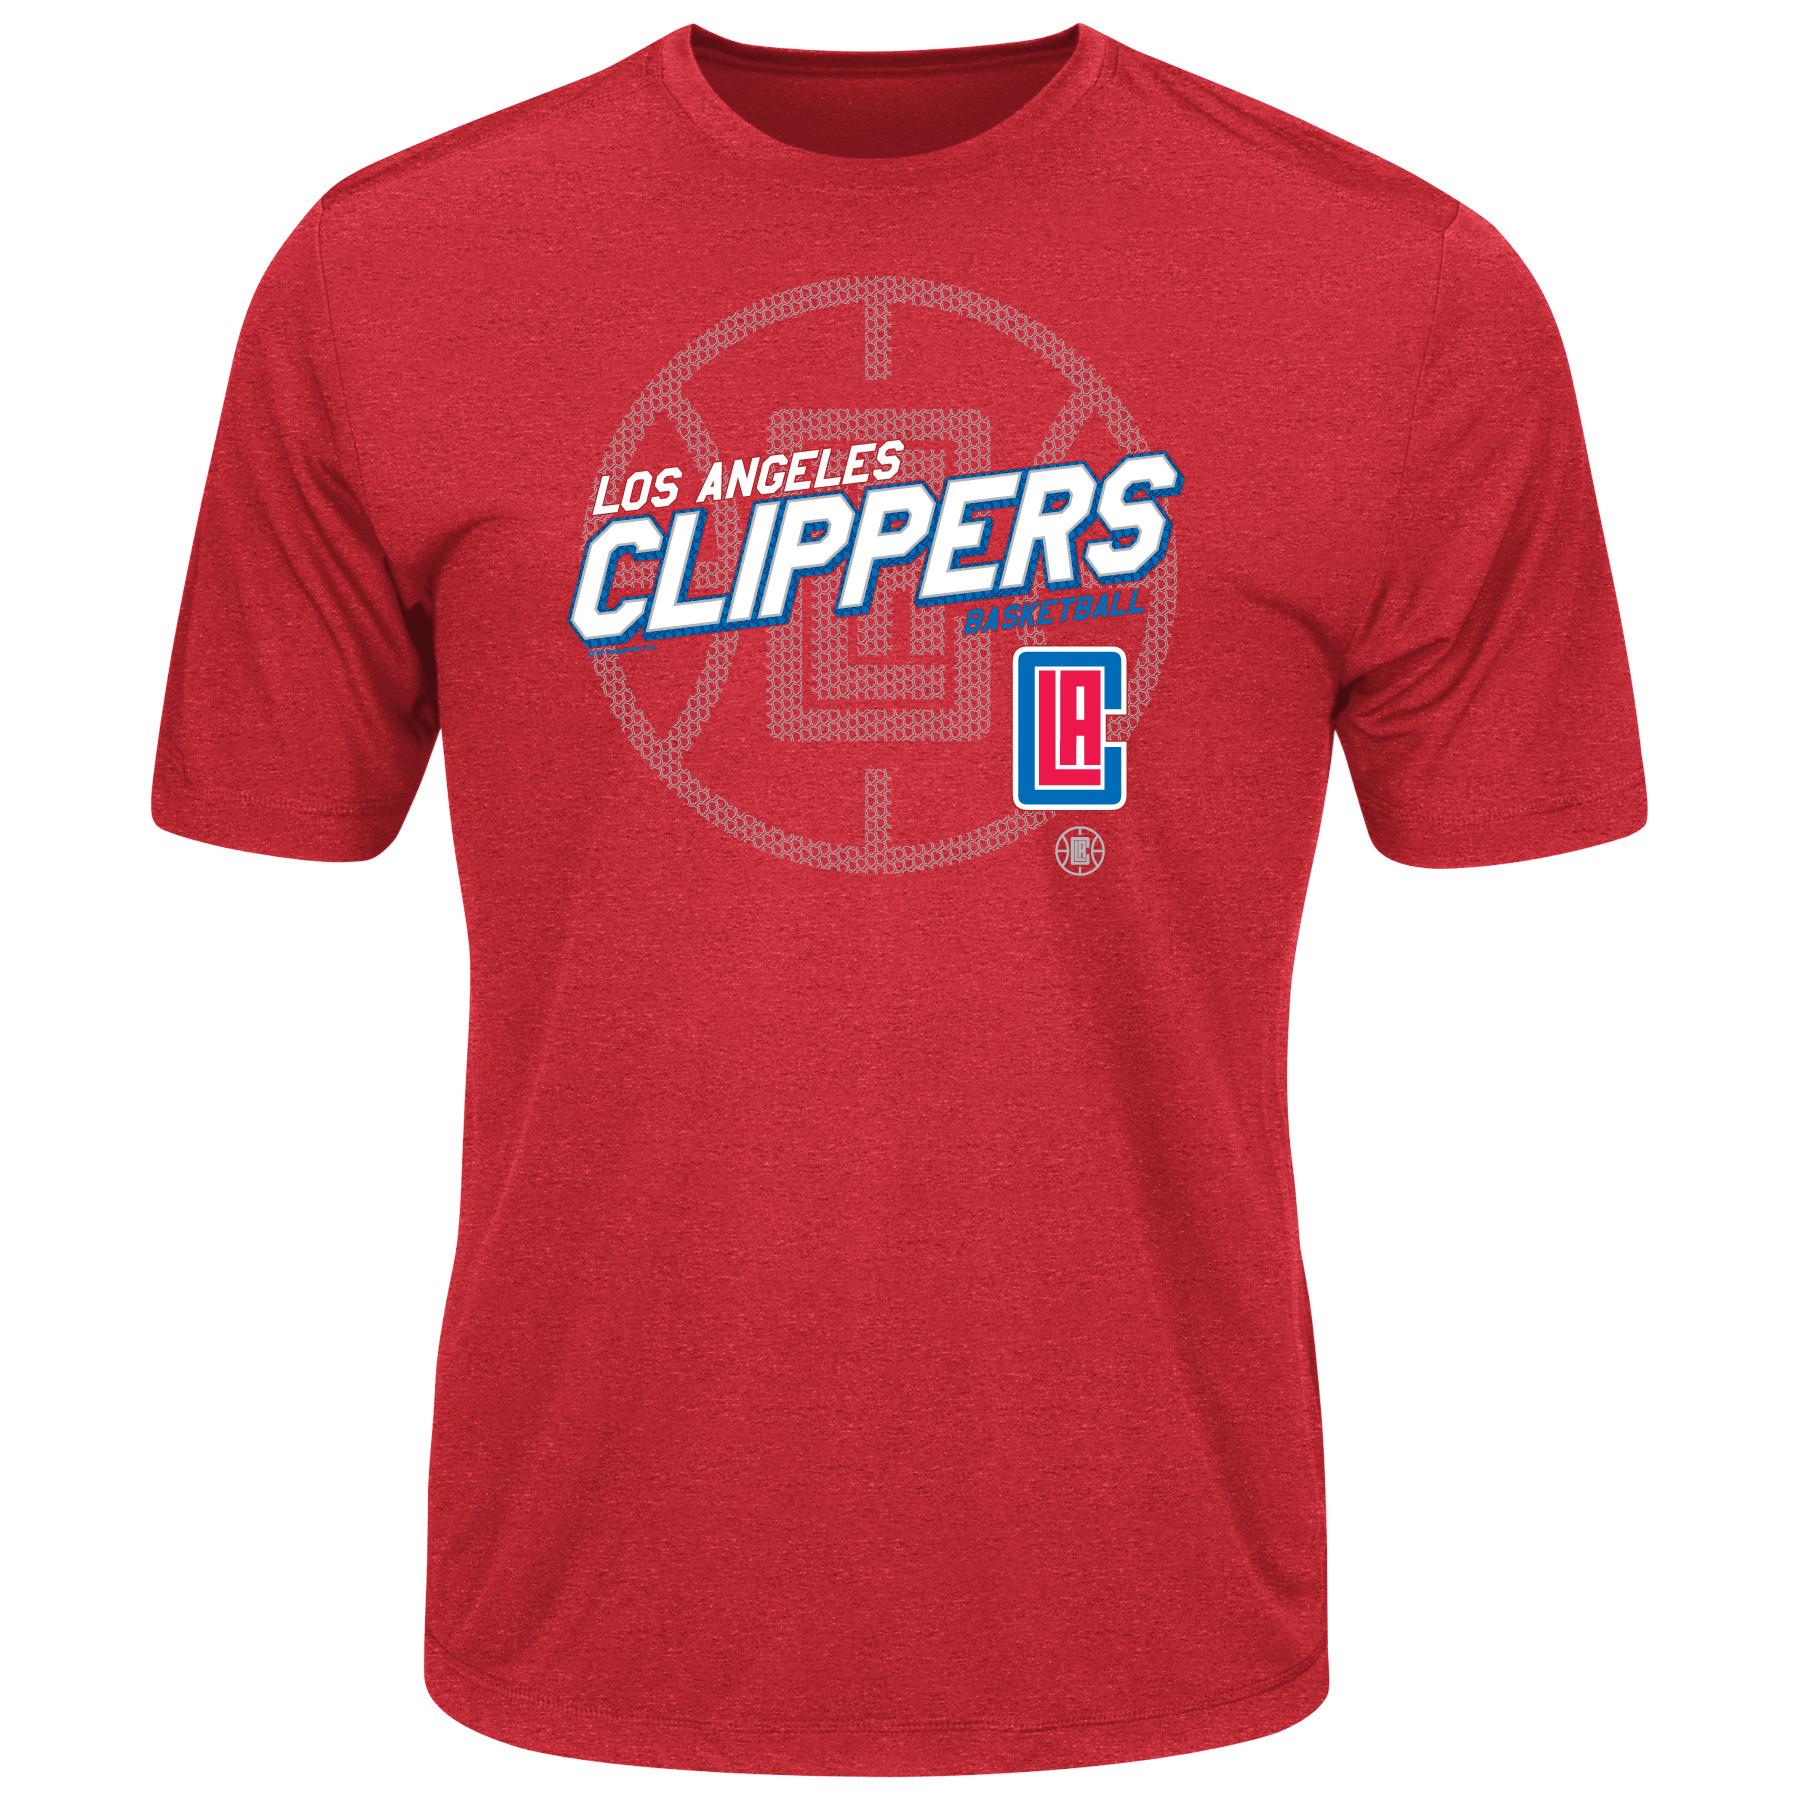 NBA(CANONICAL) Men's Big & Tall Heathered T-Shirt - Los Angeles Clippers